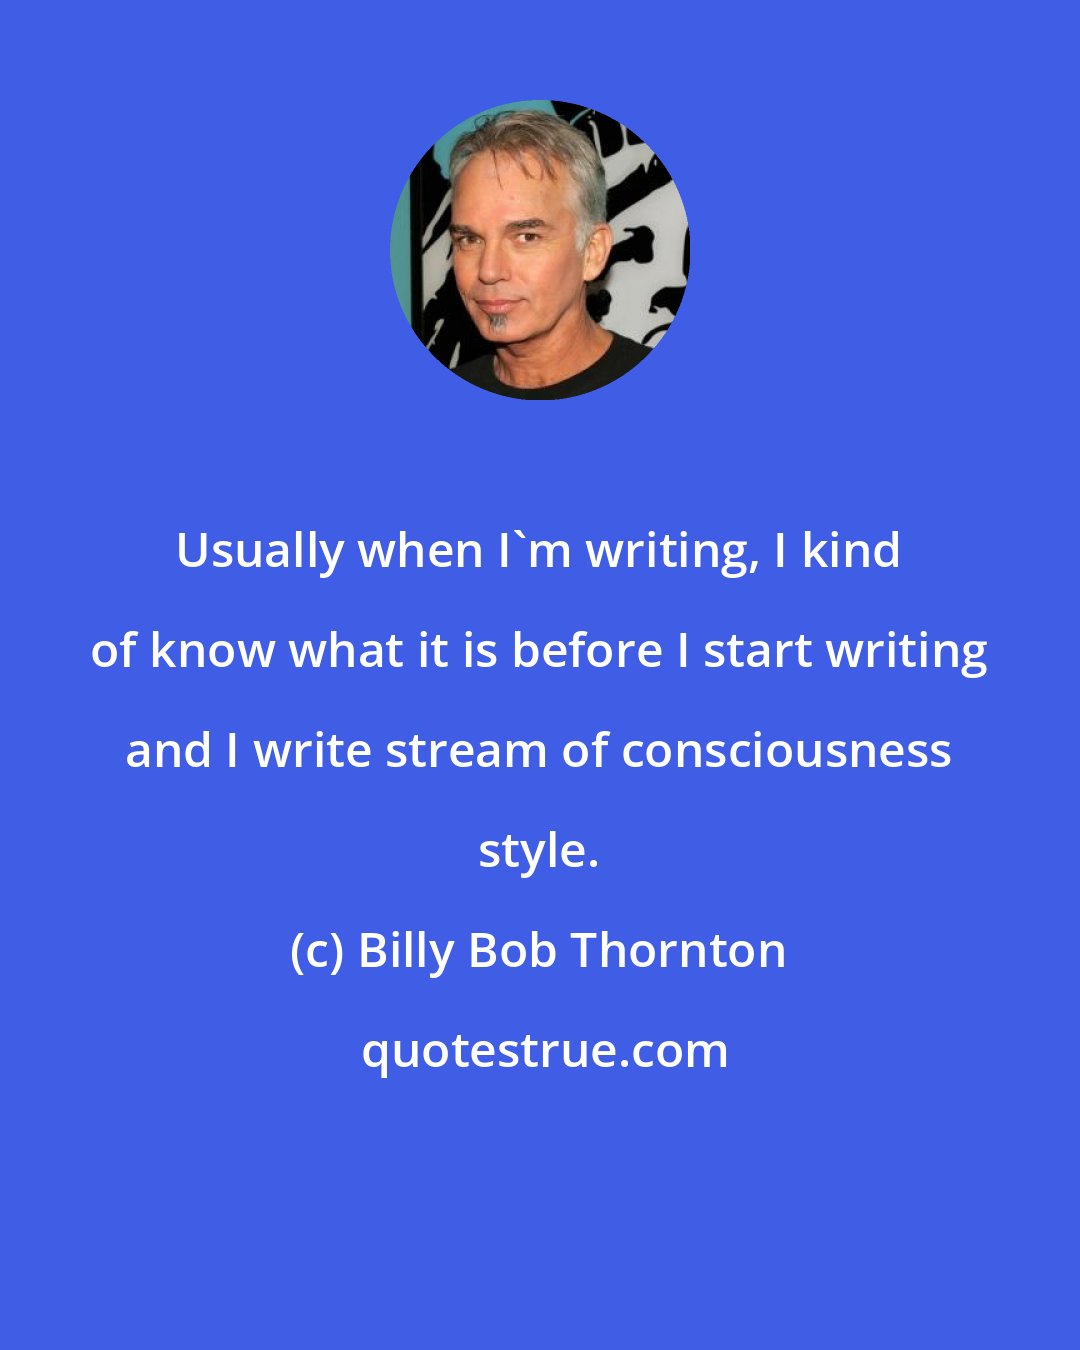 Billy Bob Thornton: Usually when I'm writing, I kind of know what it is before I start writing and I write stream of consciousness style.